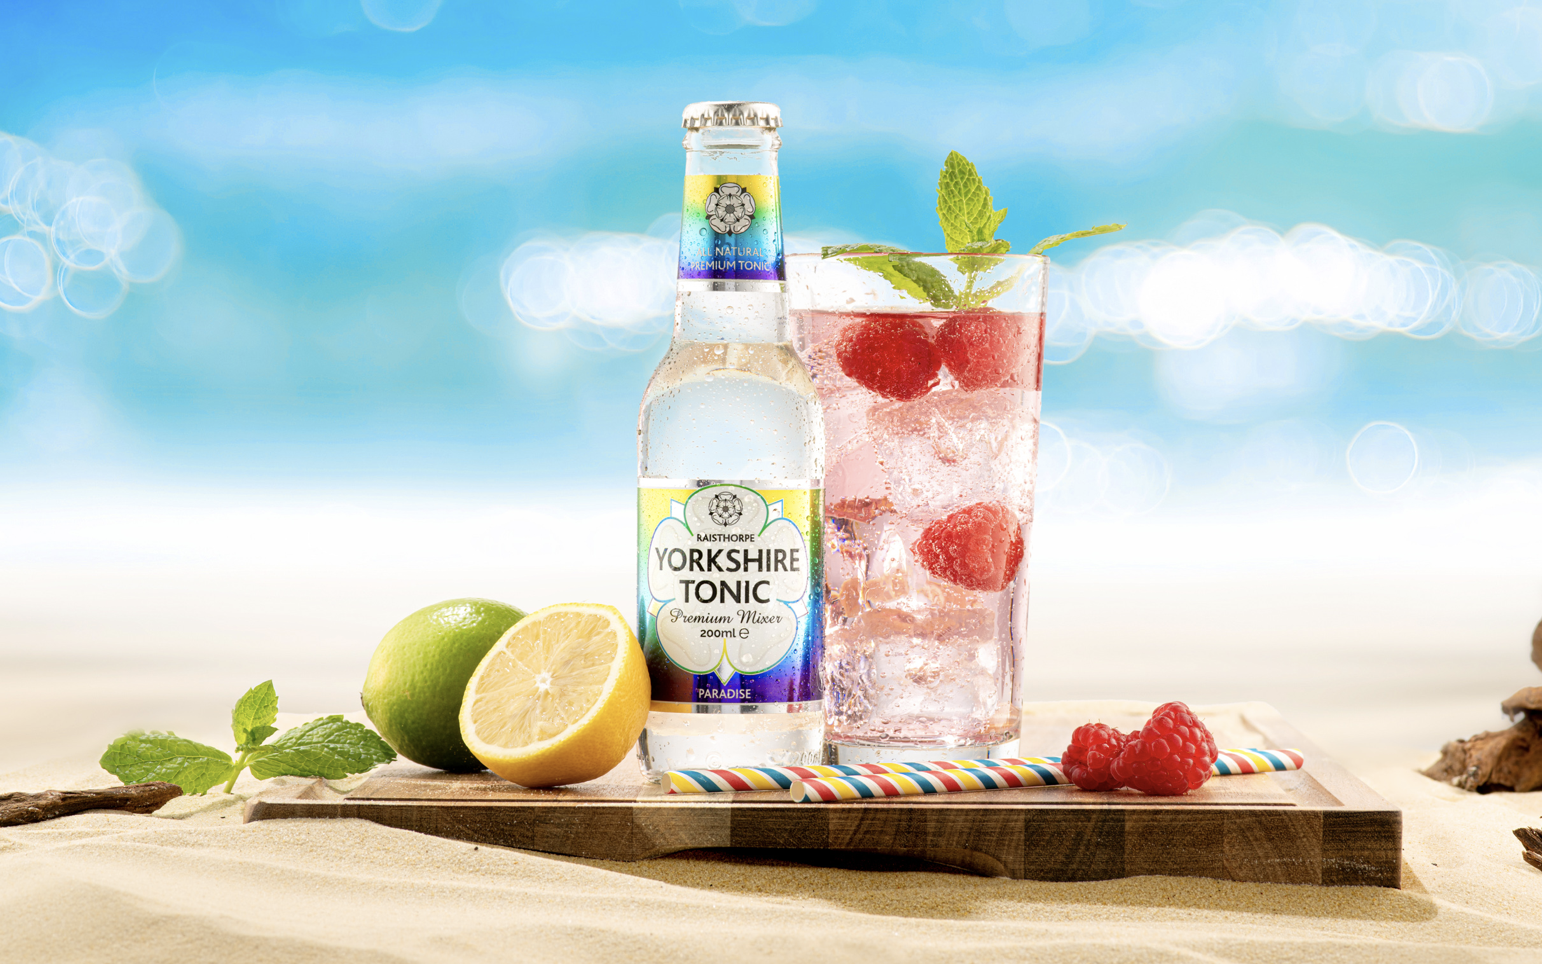 Yorkshire Tonics launches new paradise mixer for Yorkshire Day